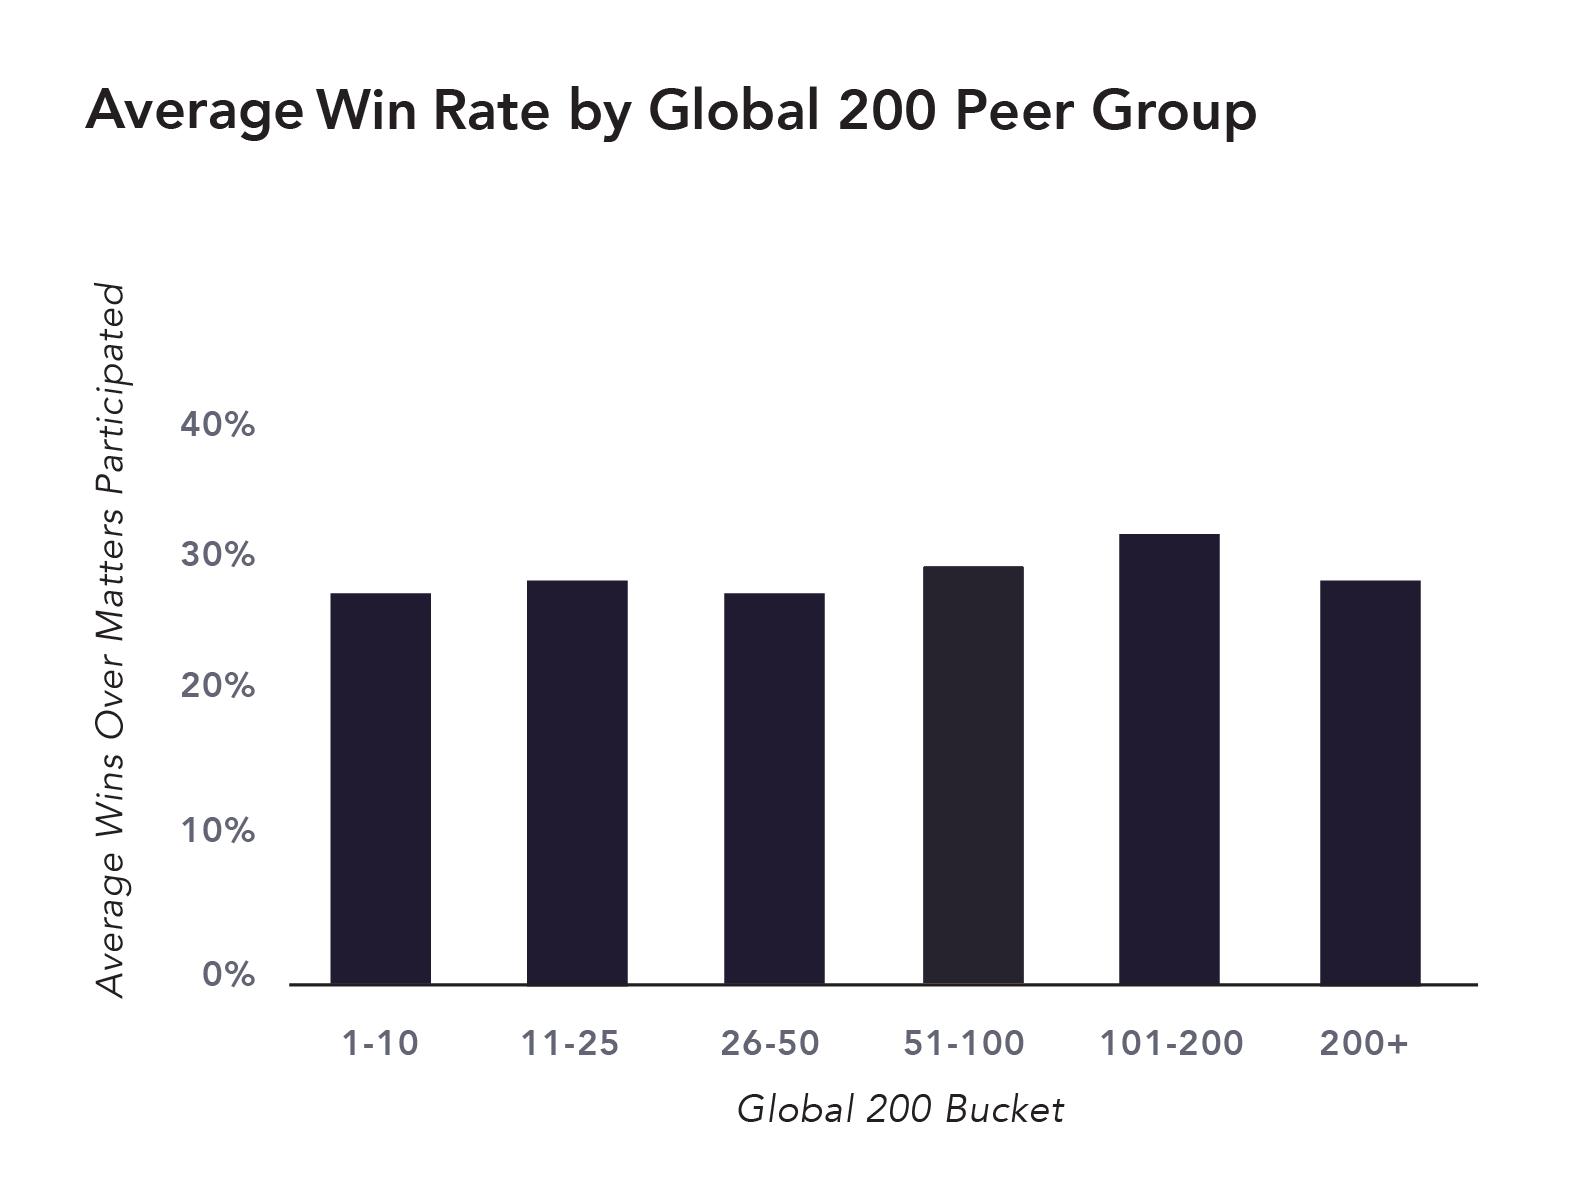 Average Win Rate by Cohort